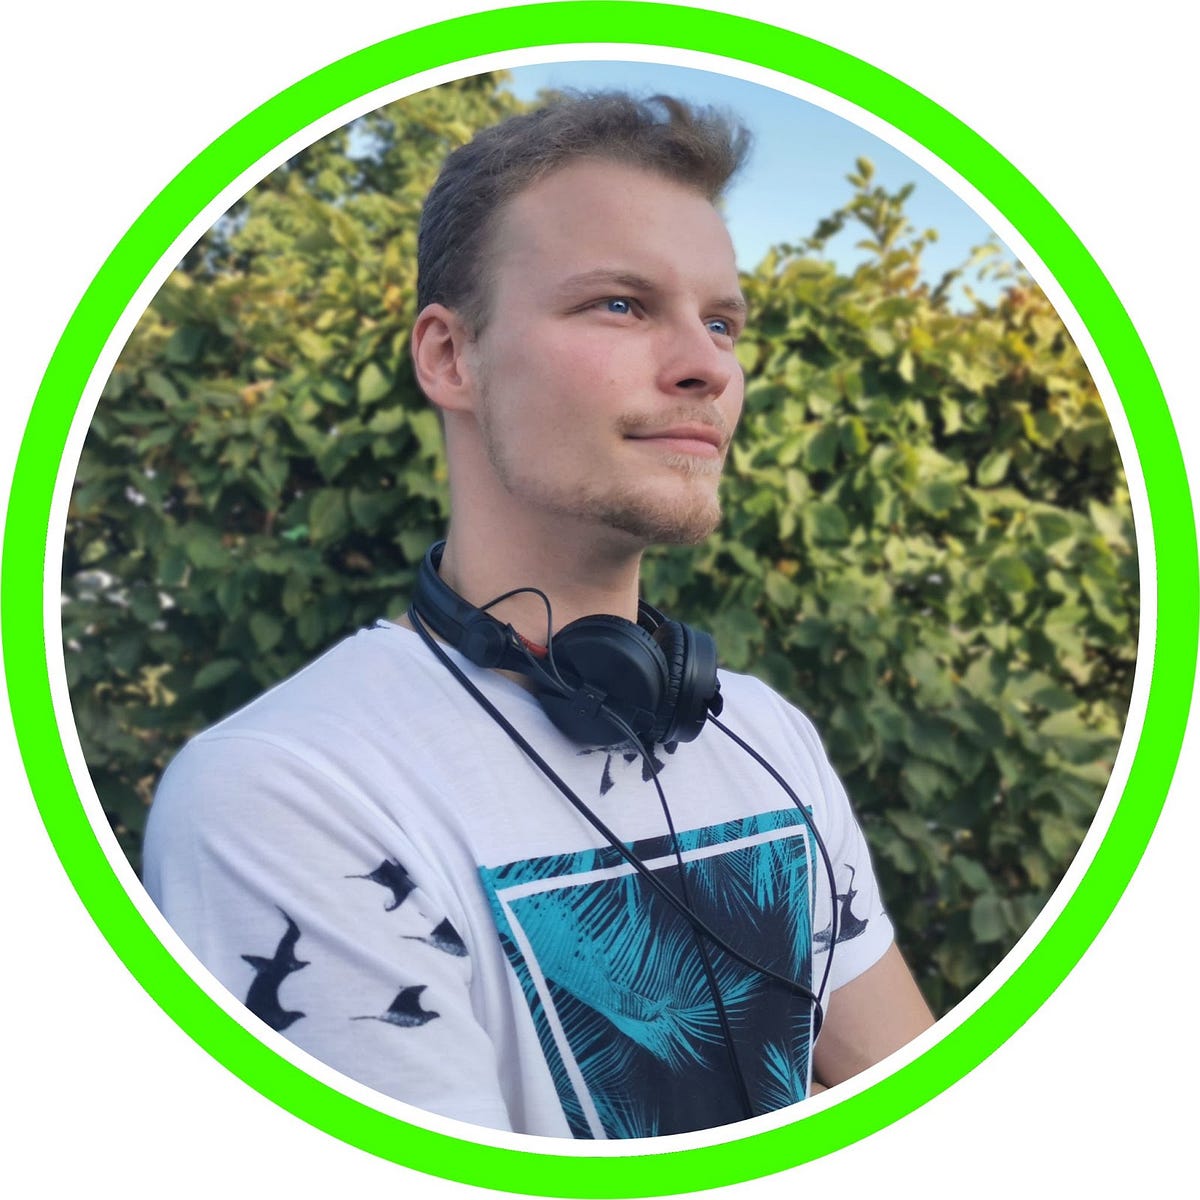 CW: Hello, my name is Christian Winter and I run the business Winter-Team. I’m from Karlsruhe located in Baden-Württemberg, Germany. I’m 25 years